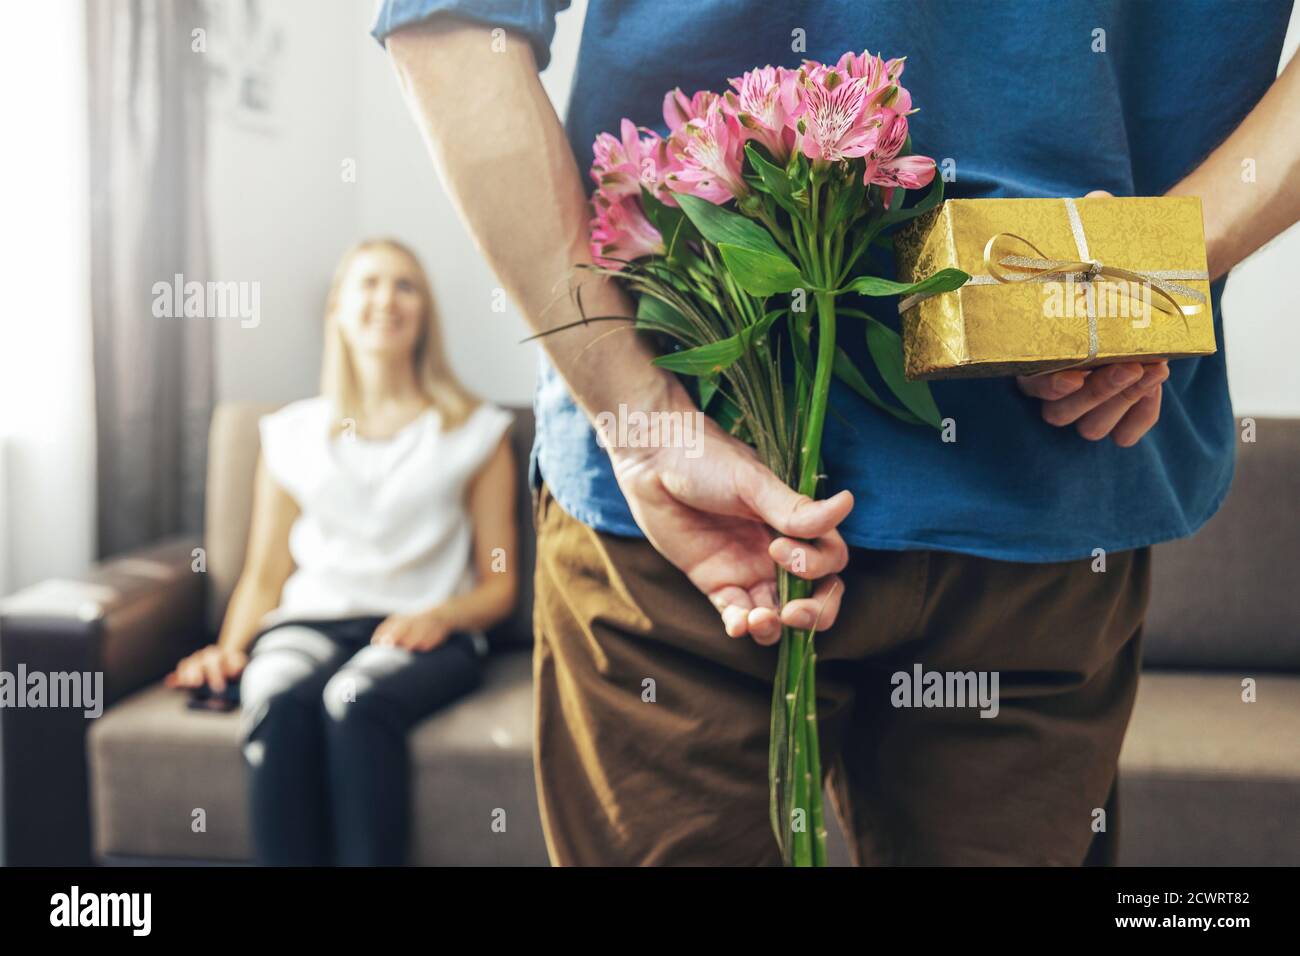 husband hiding romantic surprise present and flowers behind back to beloved wife at home Stock Photo